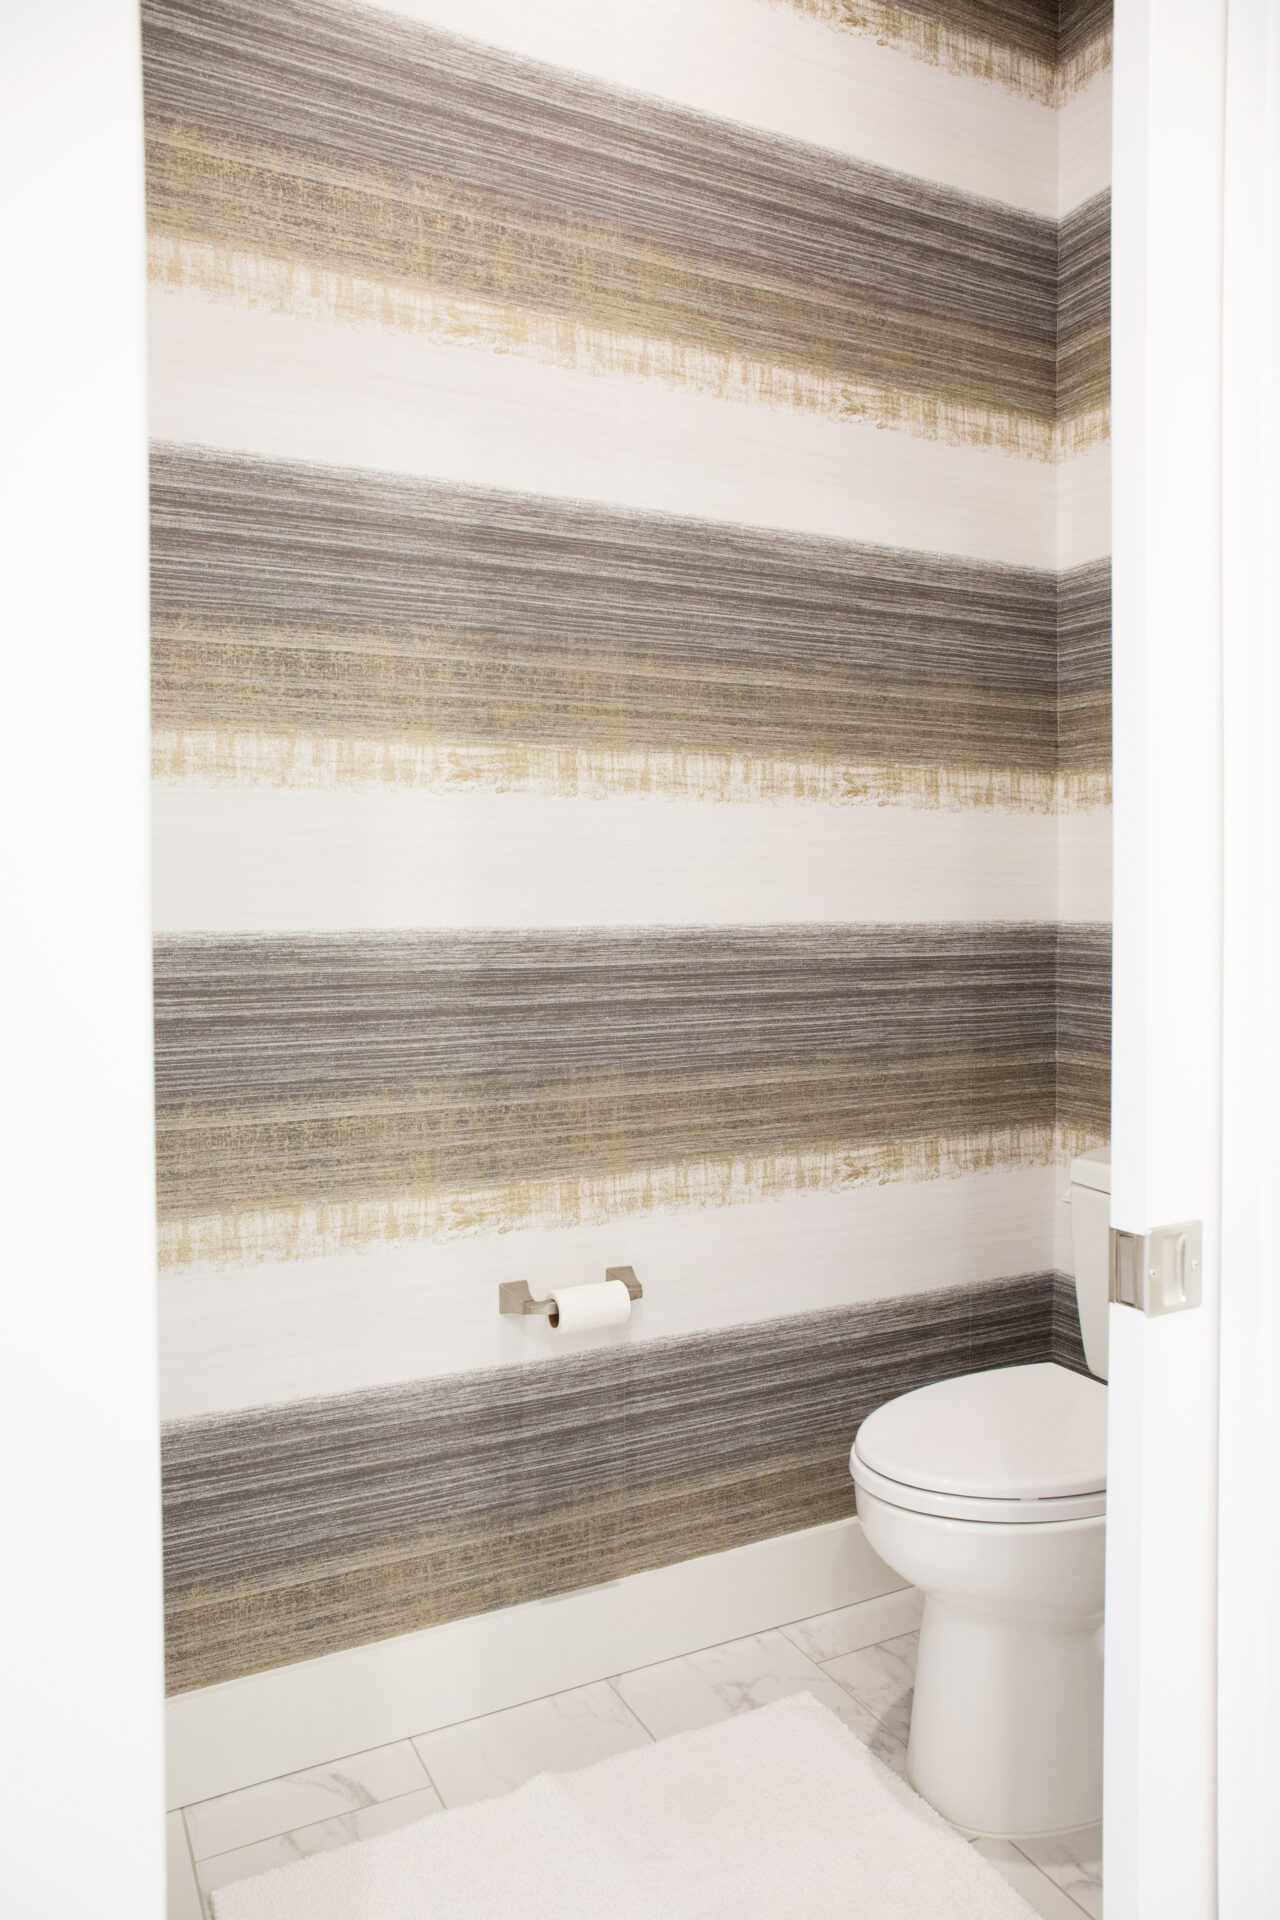 A bathroom with brown and white wallpaper